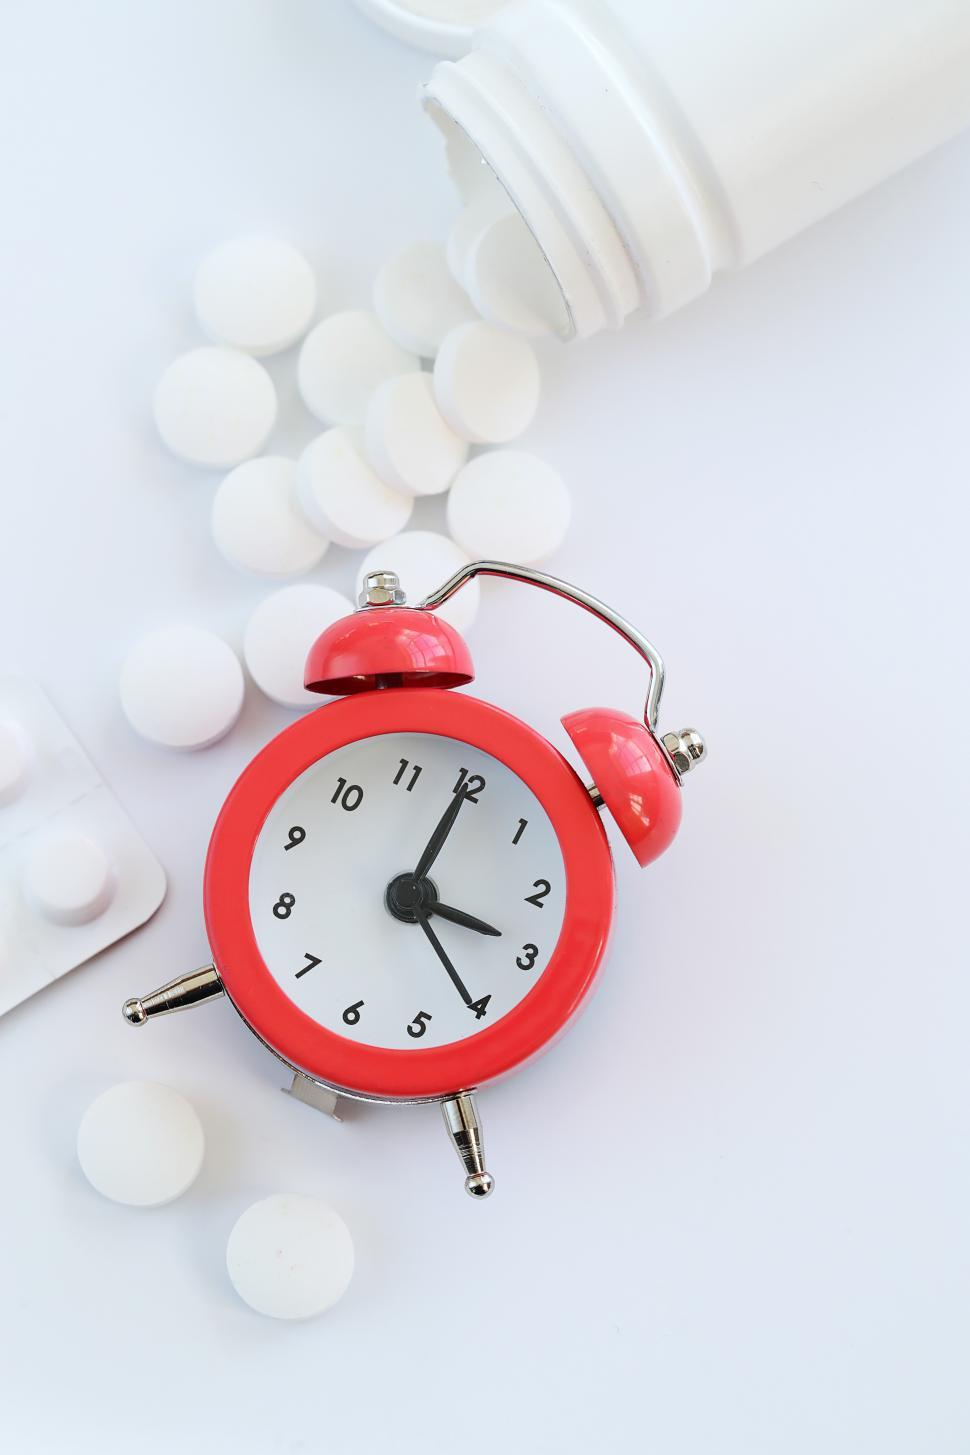 Free Image of Pharmaceutical. Drugs on the table with red clock 